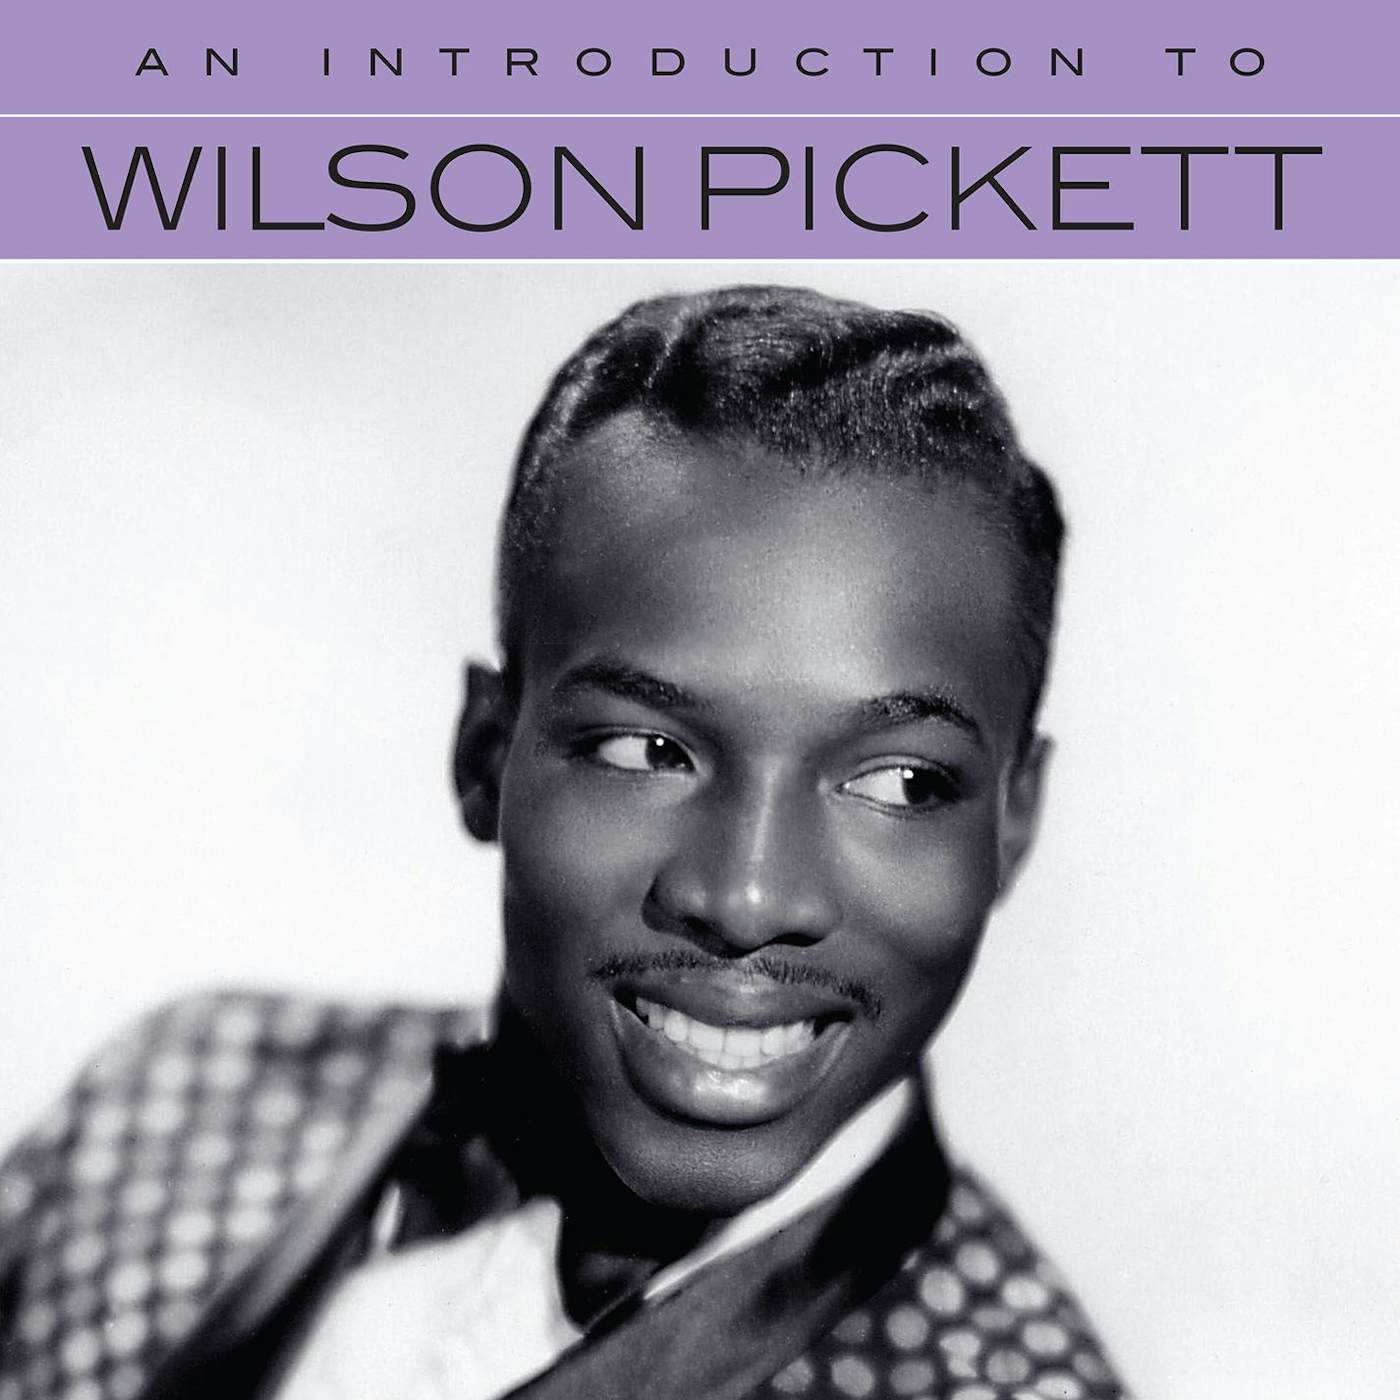 Wilson Pickett AN INTRODUCTION TO CD